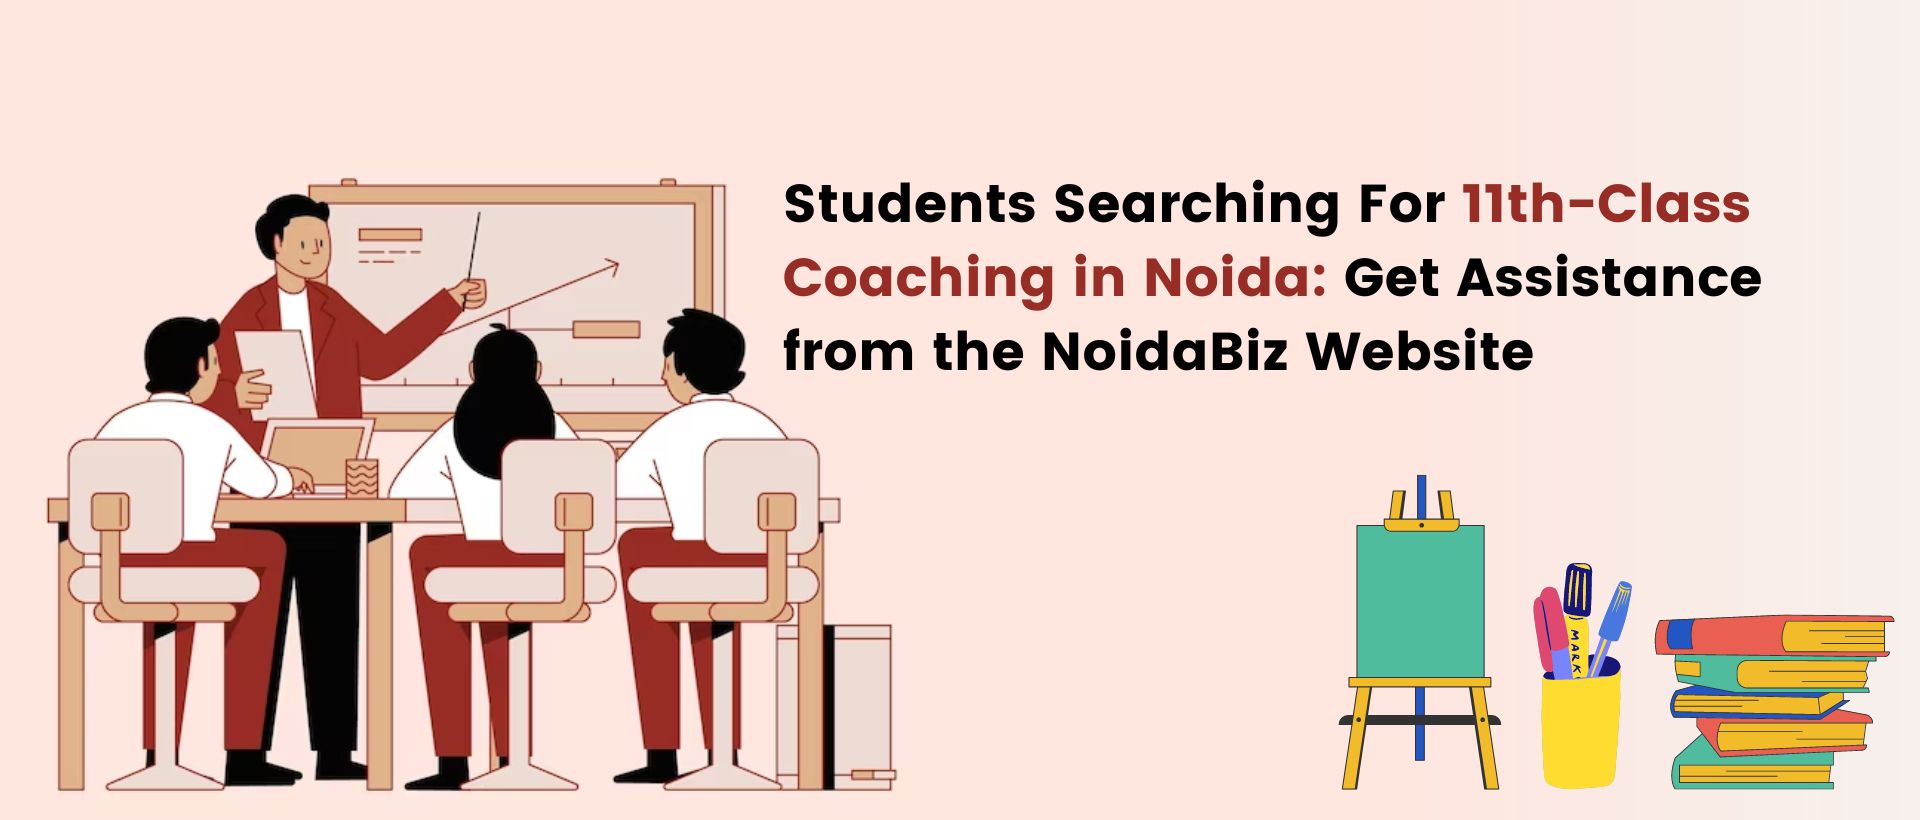 Students searching for 11th-class coaching in noida : get assistance from the noidabiz website